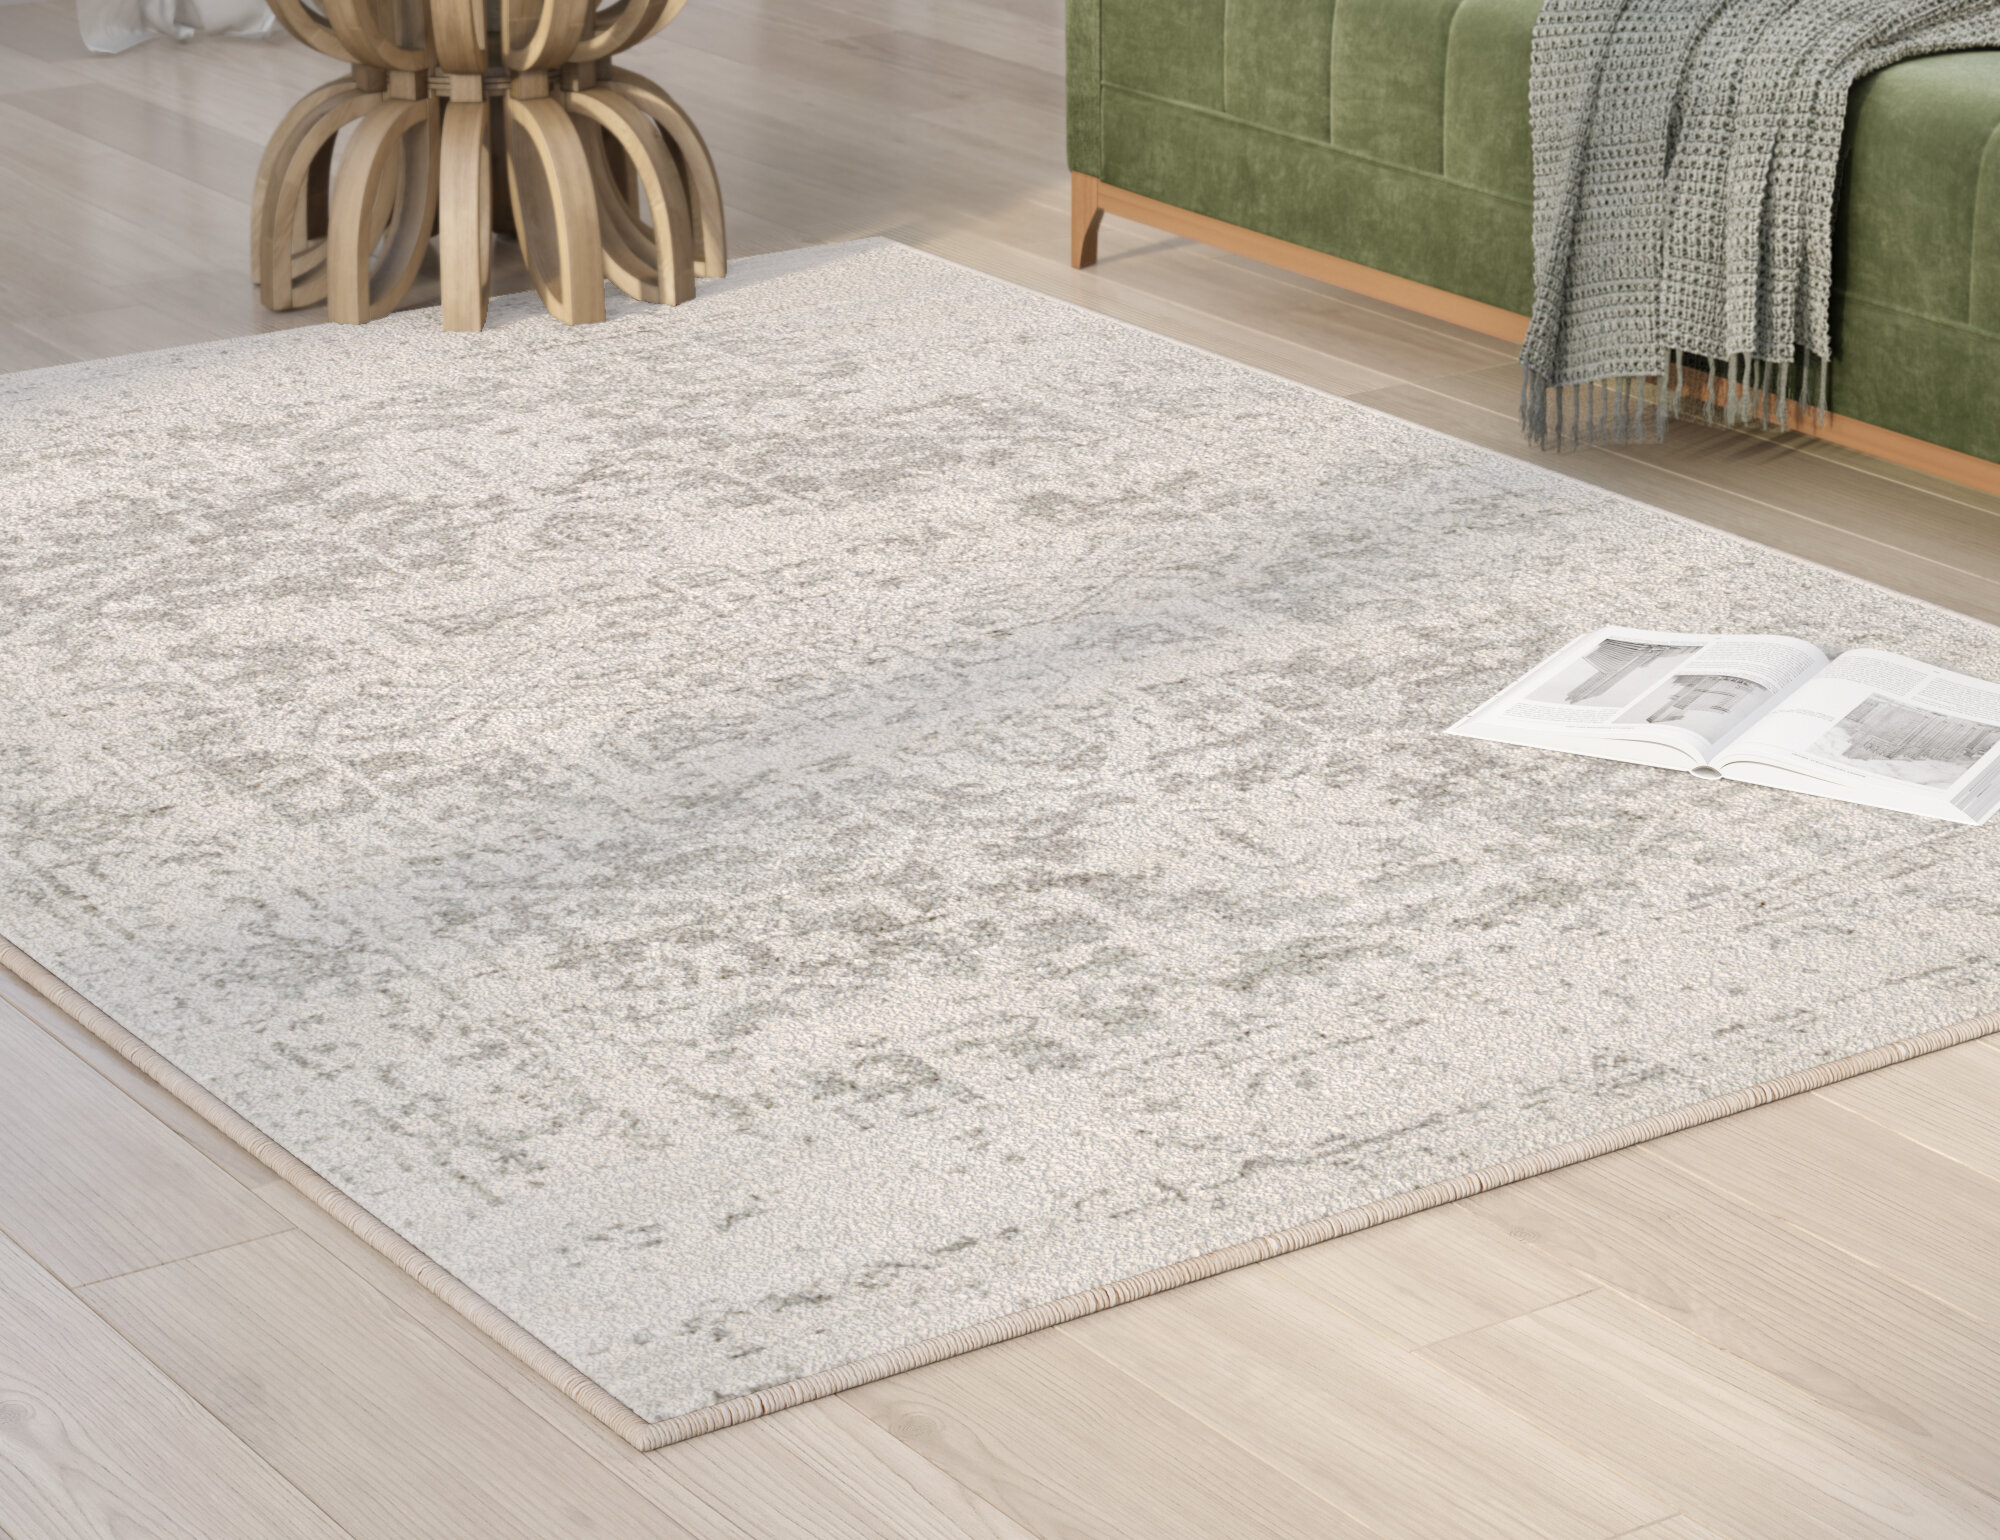 How To Choose The Right Rug Sizes Wayfair